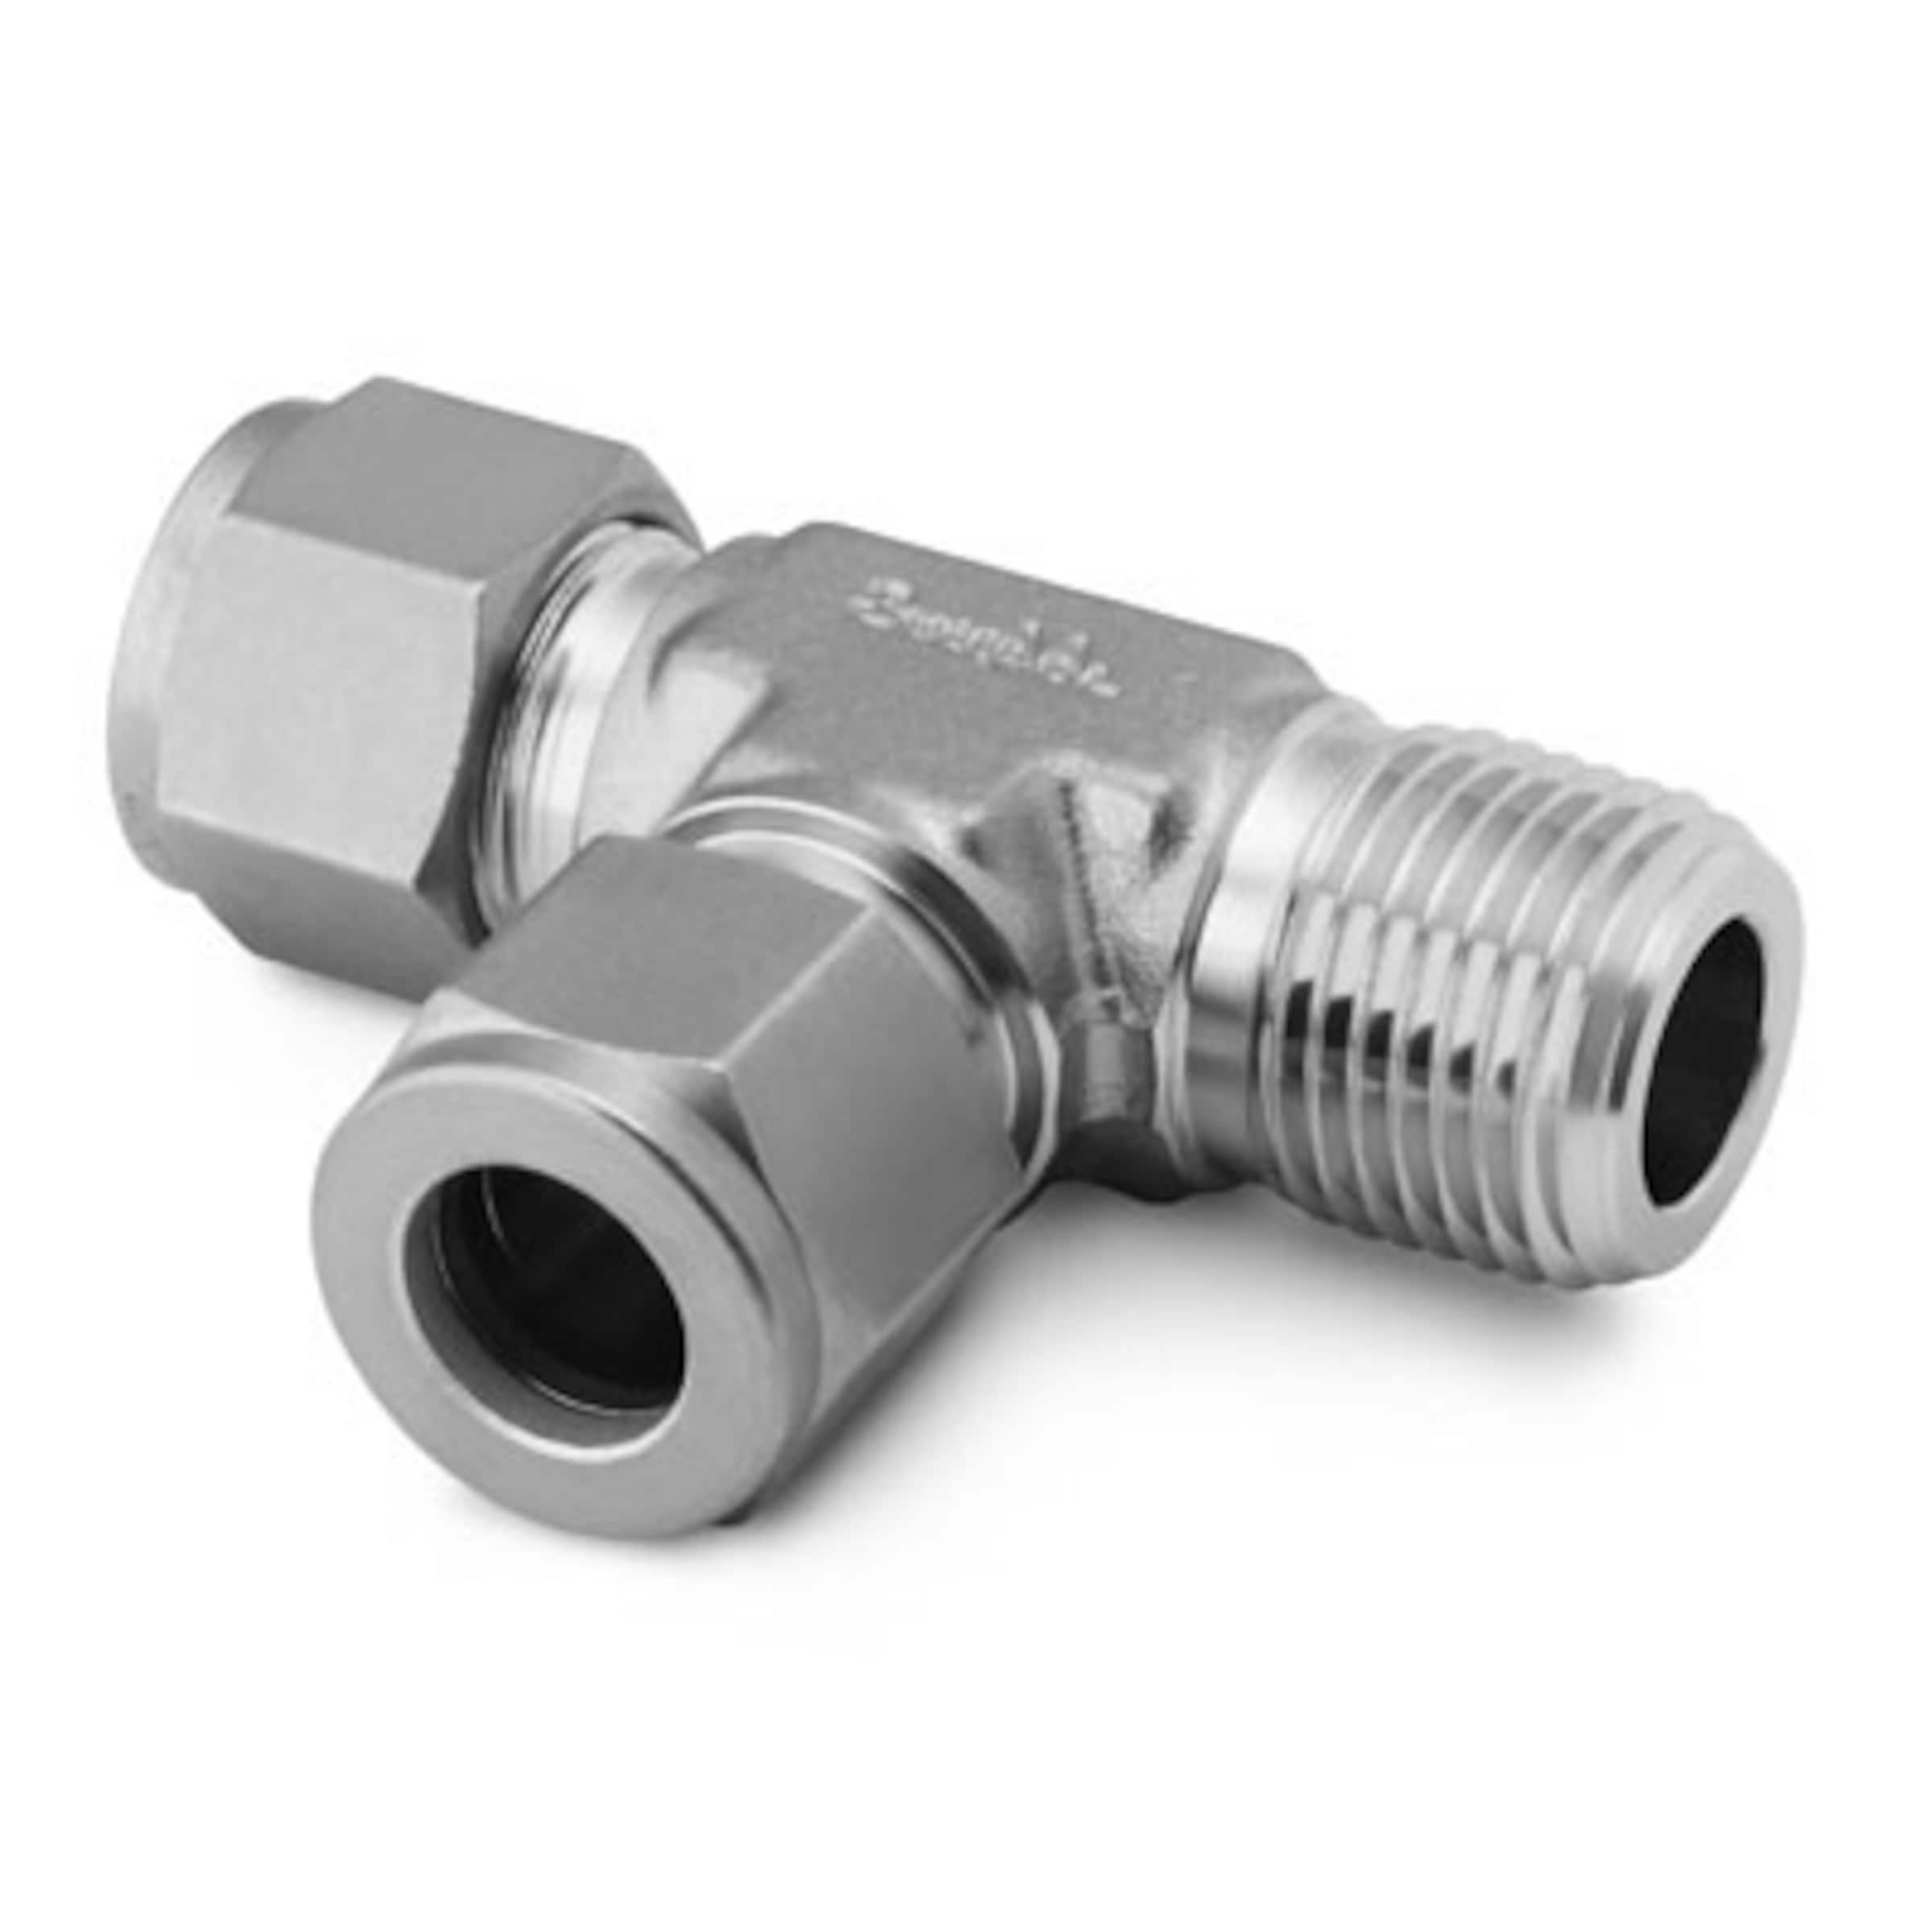 SS-1210-3-8-8 Swagelok Tube Fitting, Reducing Union Tee, 3/4 in. x